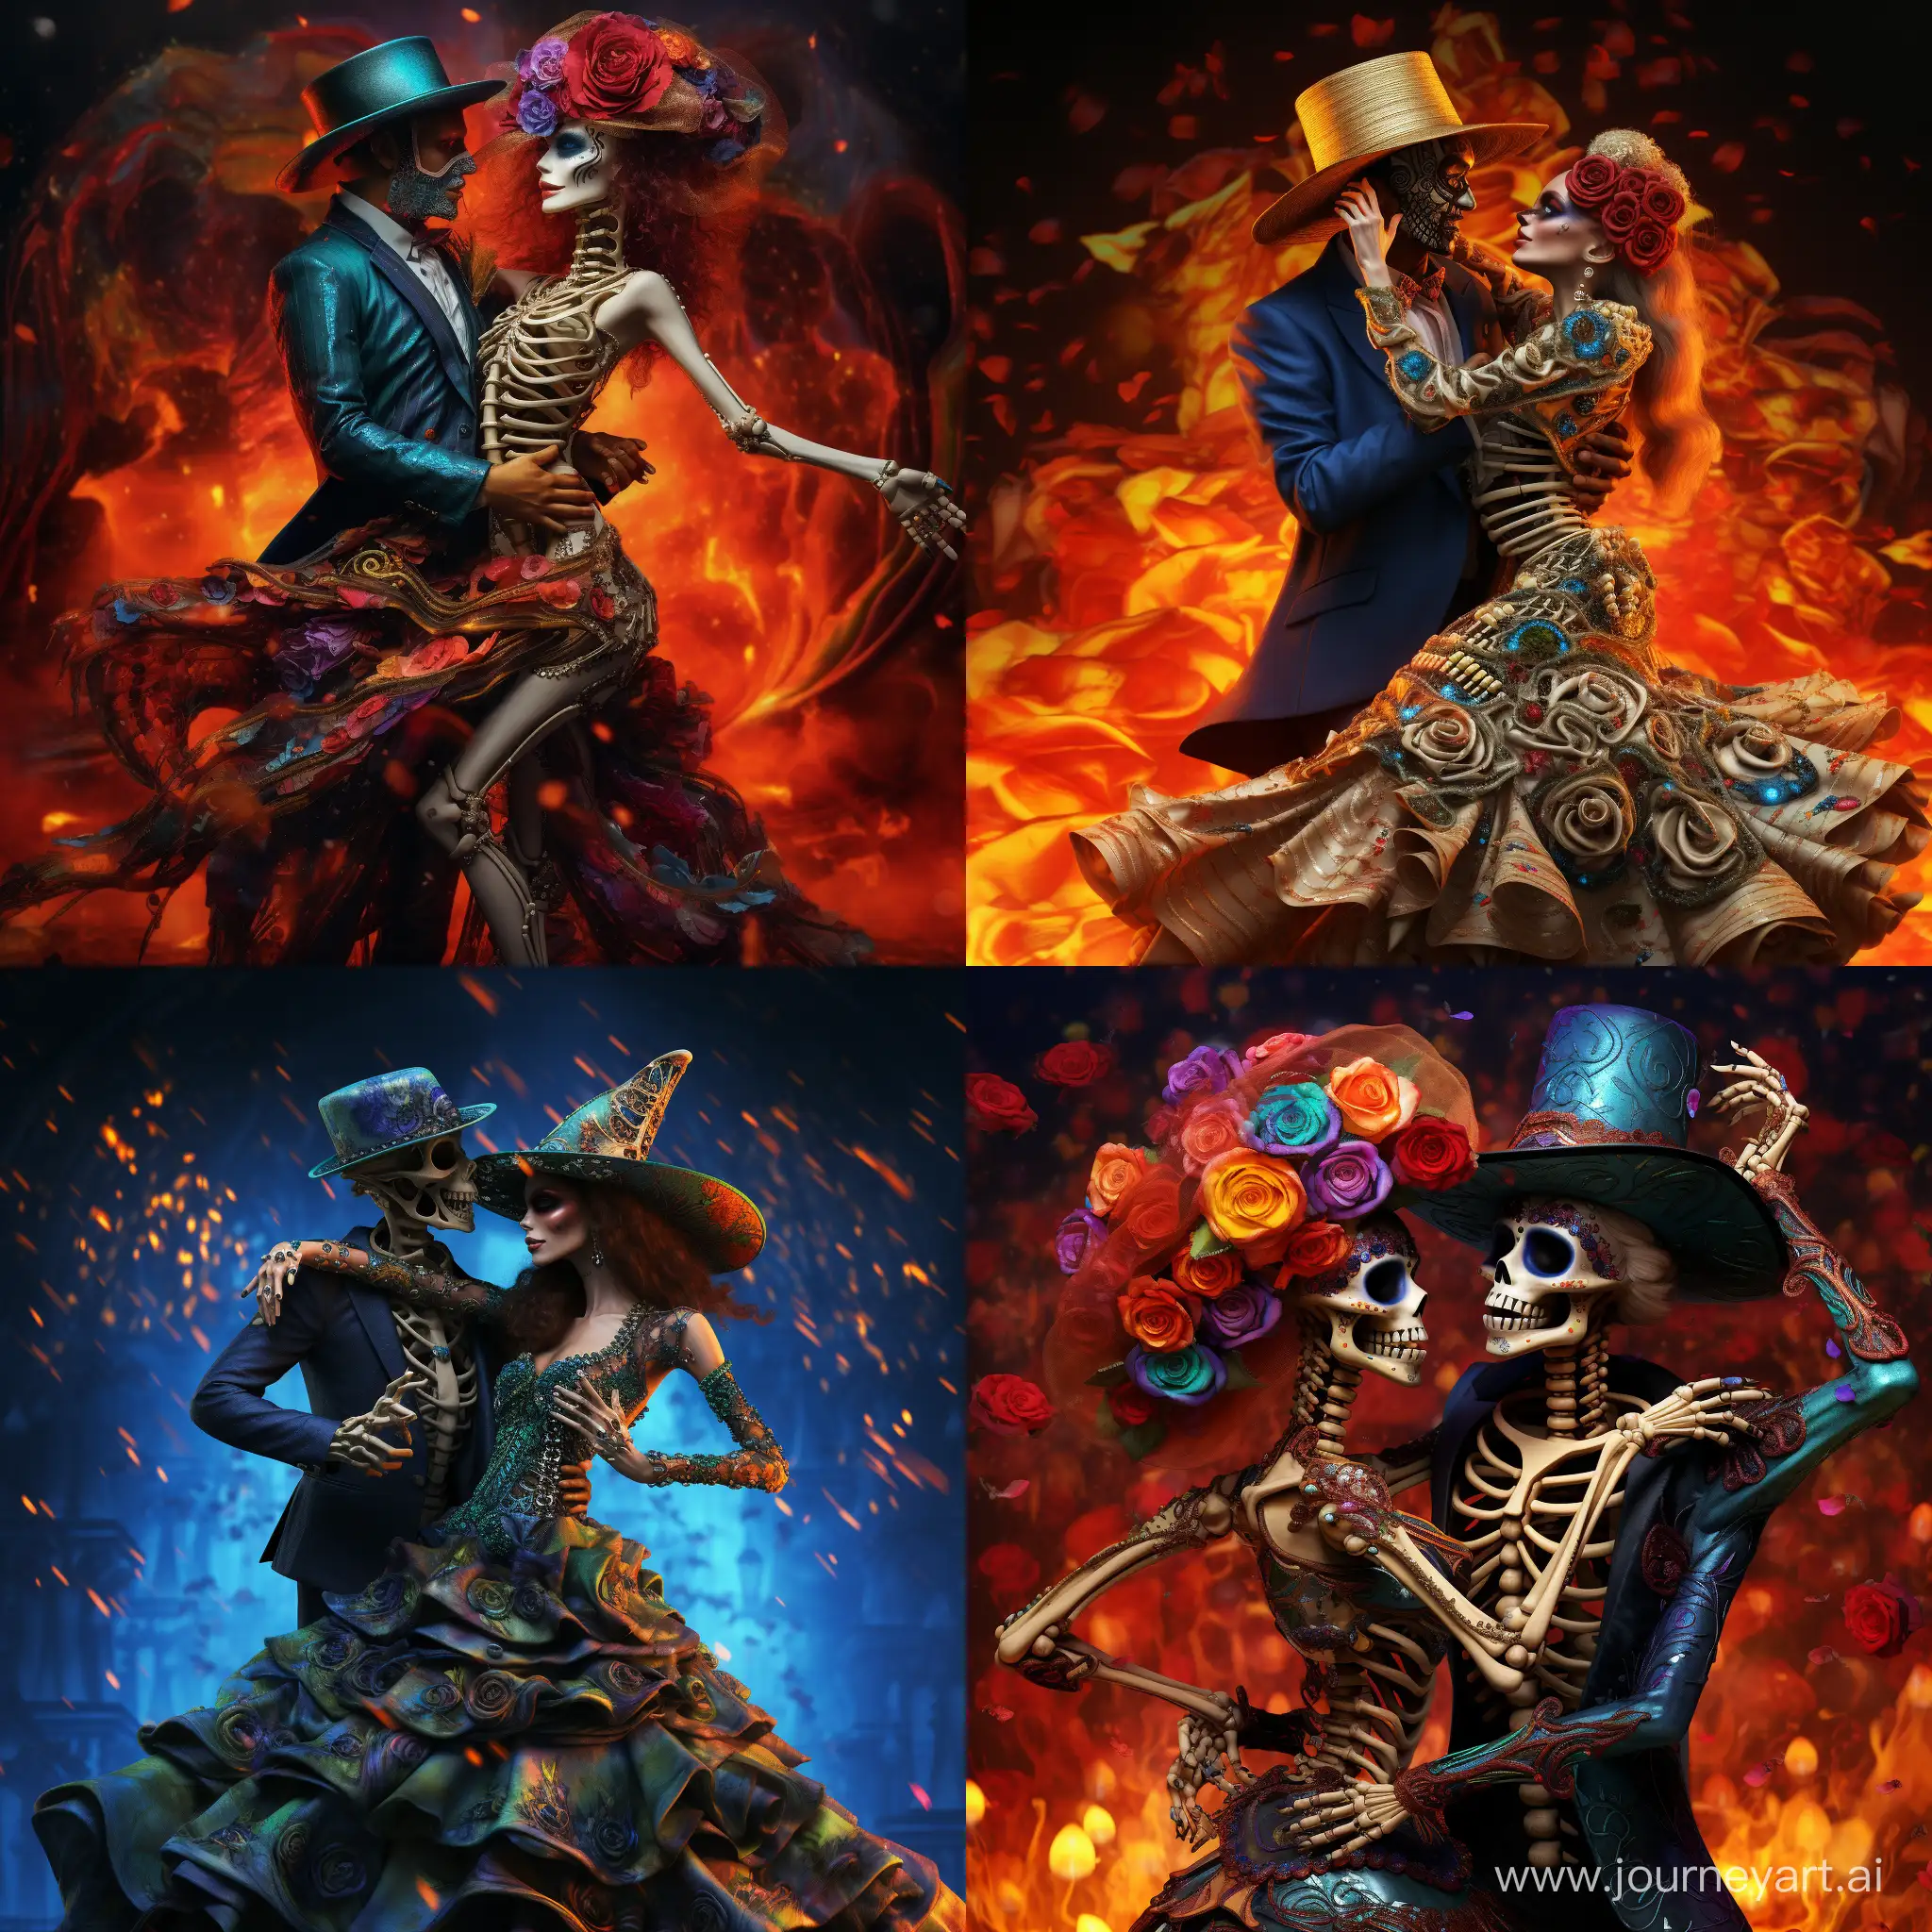 Burning-Passion-Spectacular-Skeletons-in-Flaming-Dance